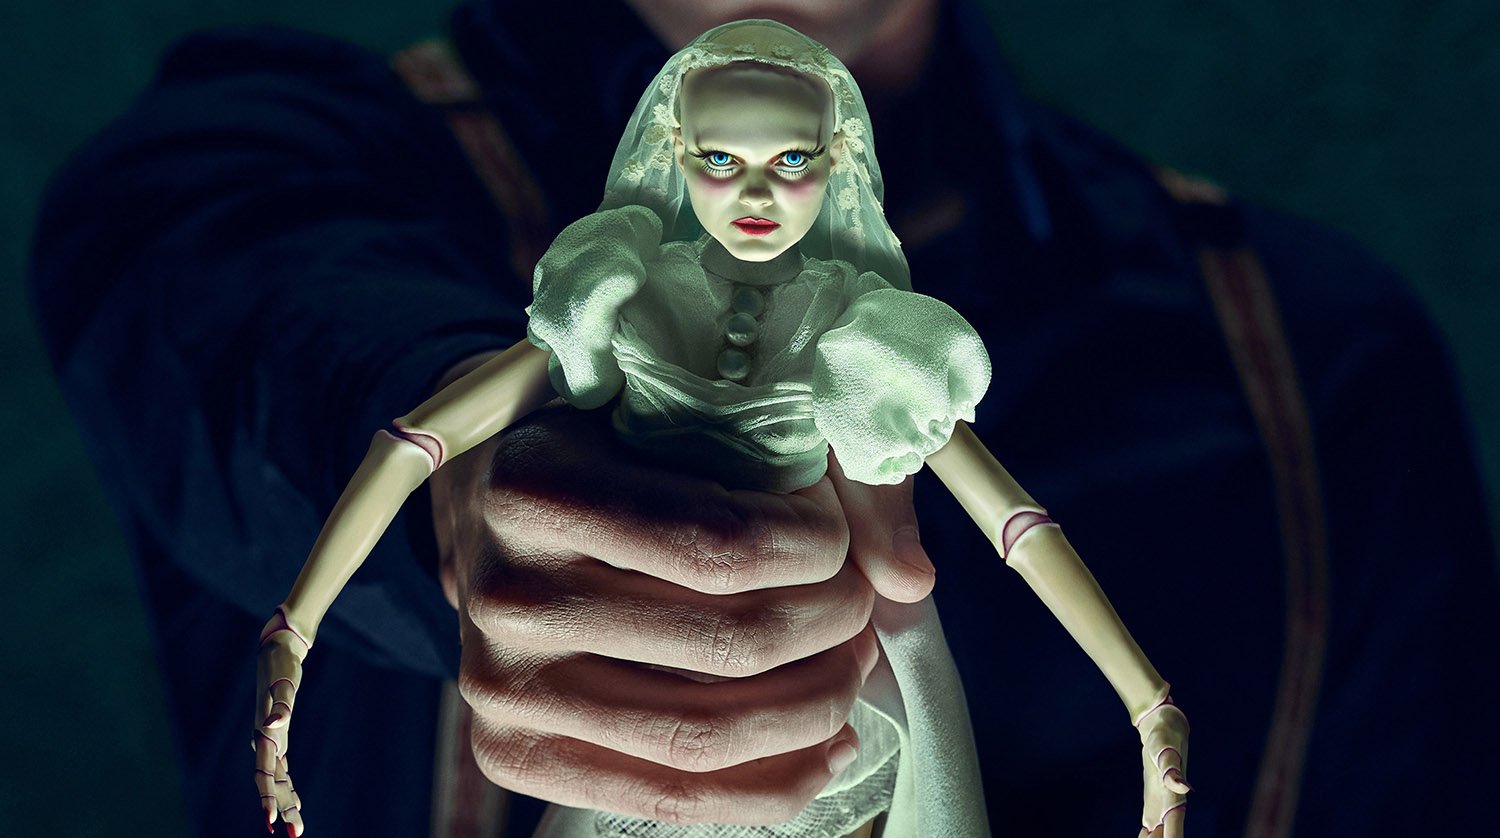 American Horror Stories Season 2 key art shows a hand wrapped around a bride doll, representing the season 2 episode 4 release date, title, and cast list